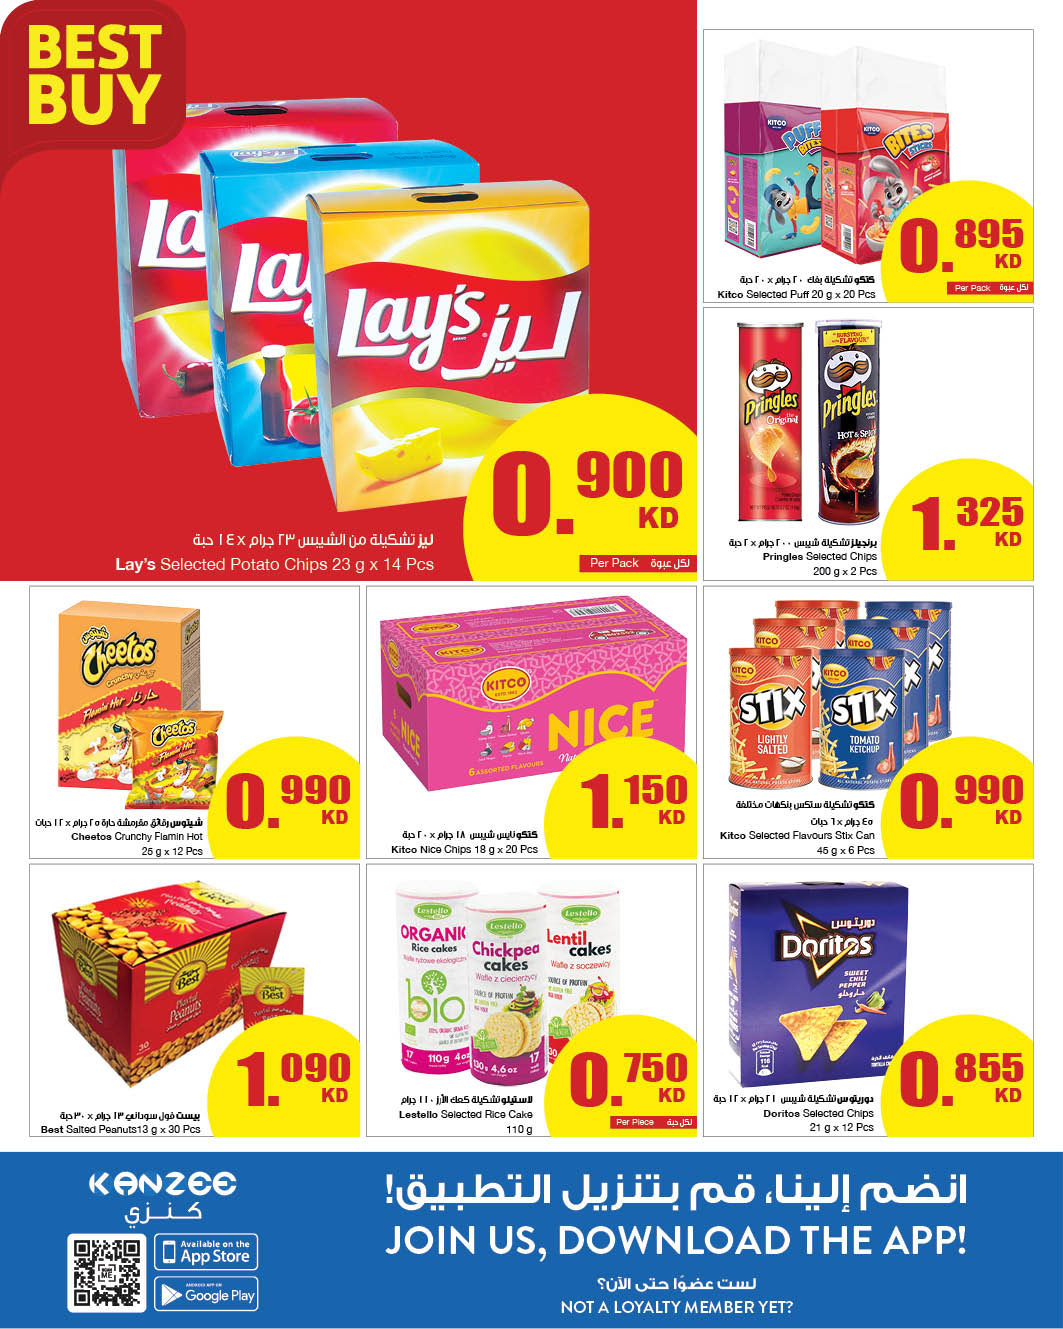 The Sultan Center Weekly Offers, Kuwait Sultan promotion Sale 4